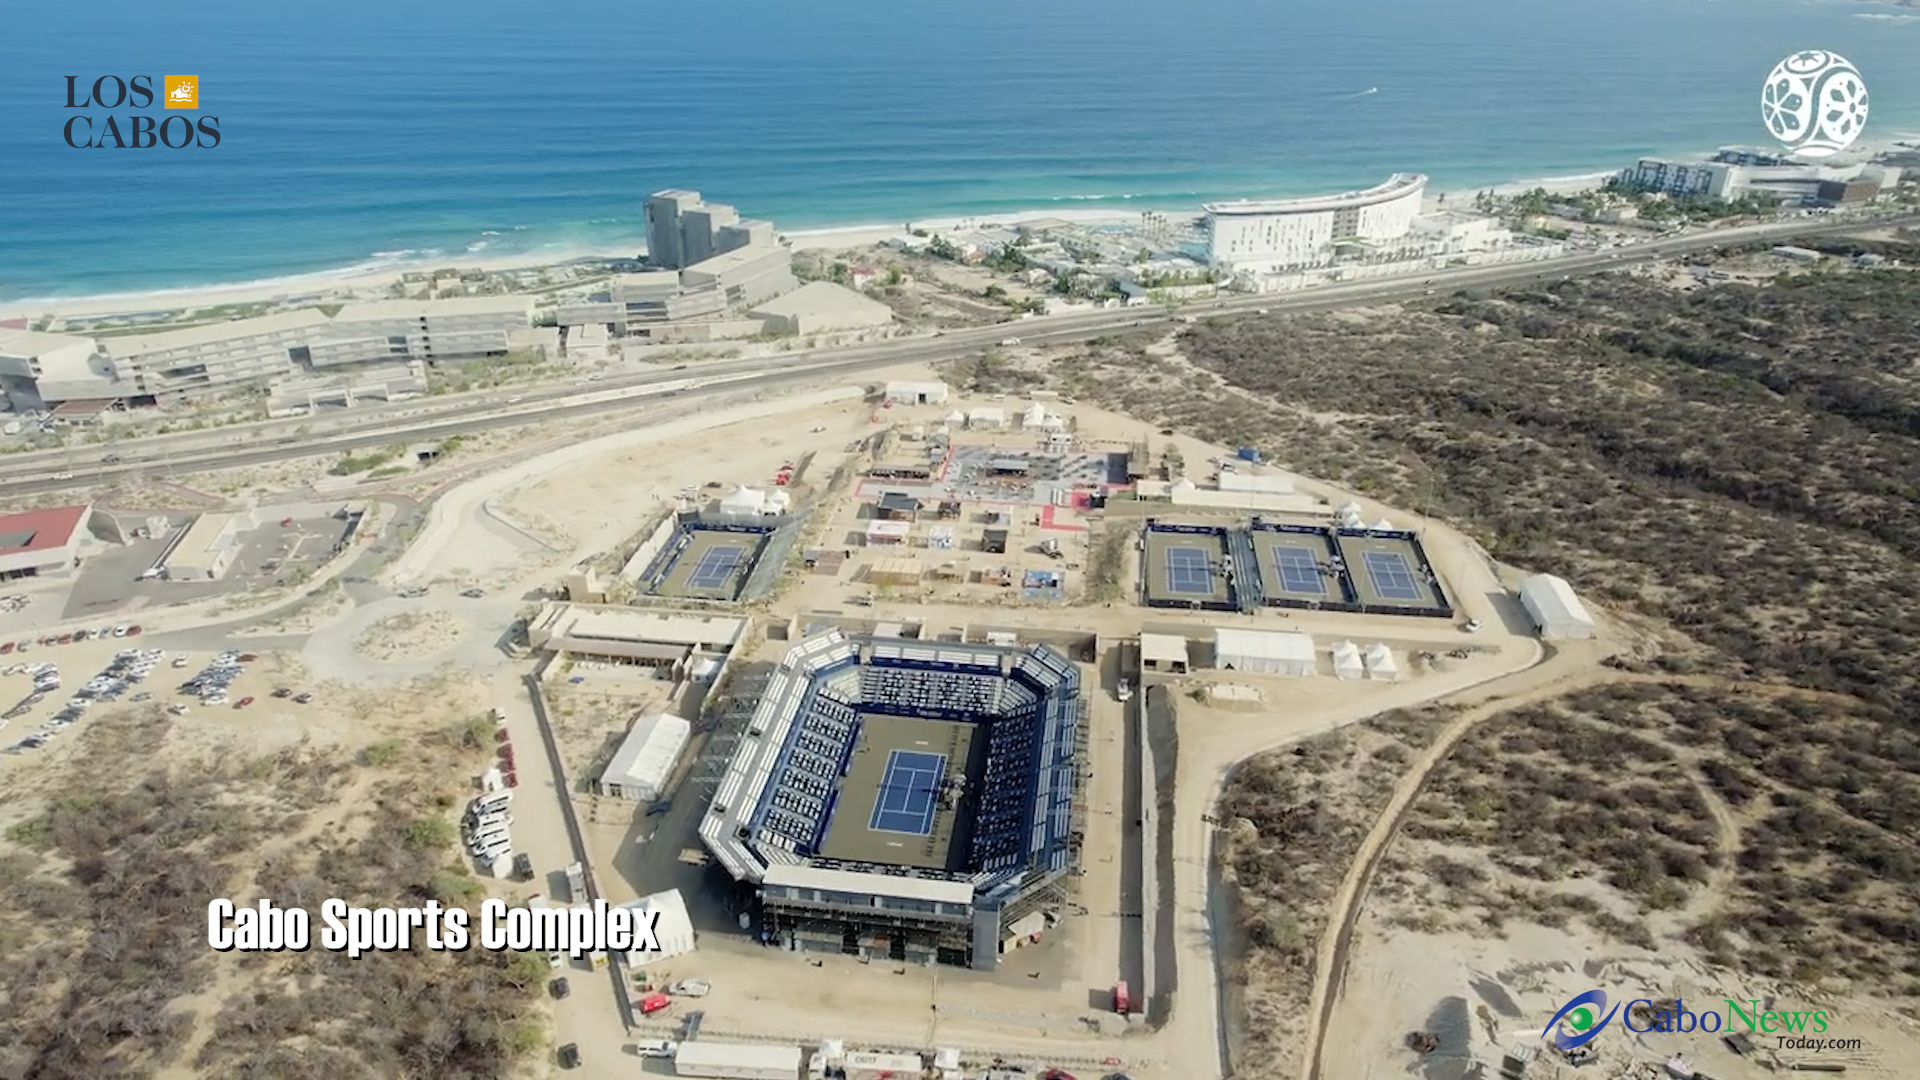 ATP 250 Los Cabos begins in its sixth edition - Cabo News Today